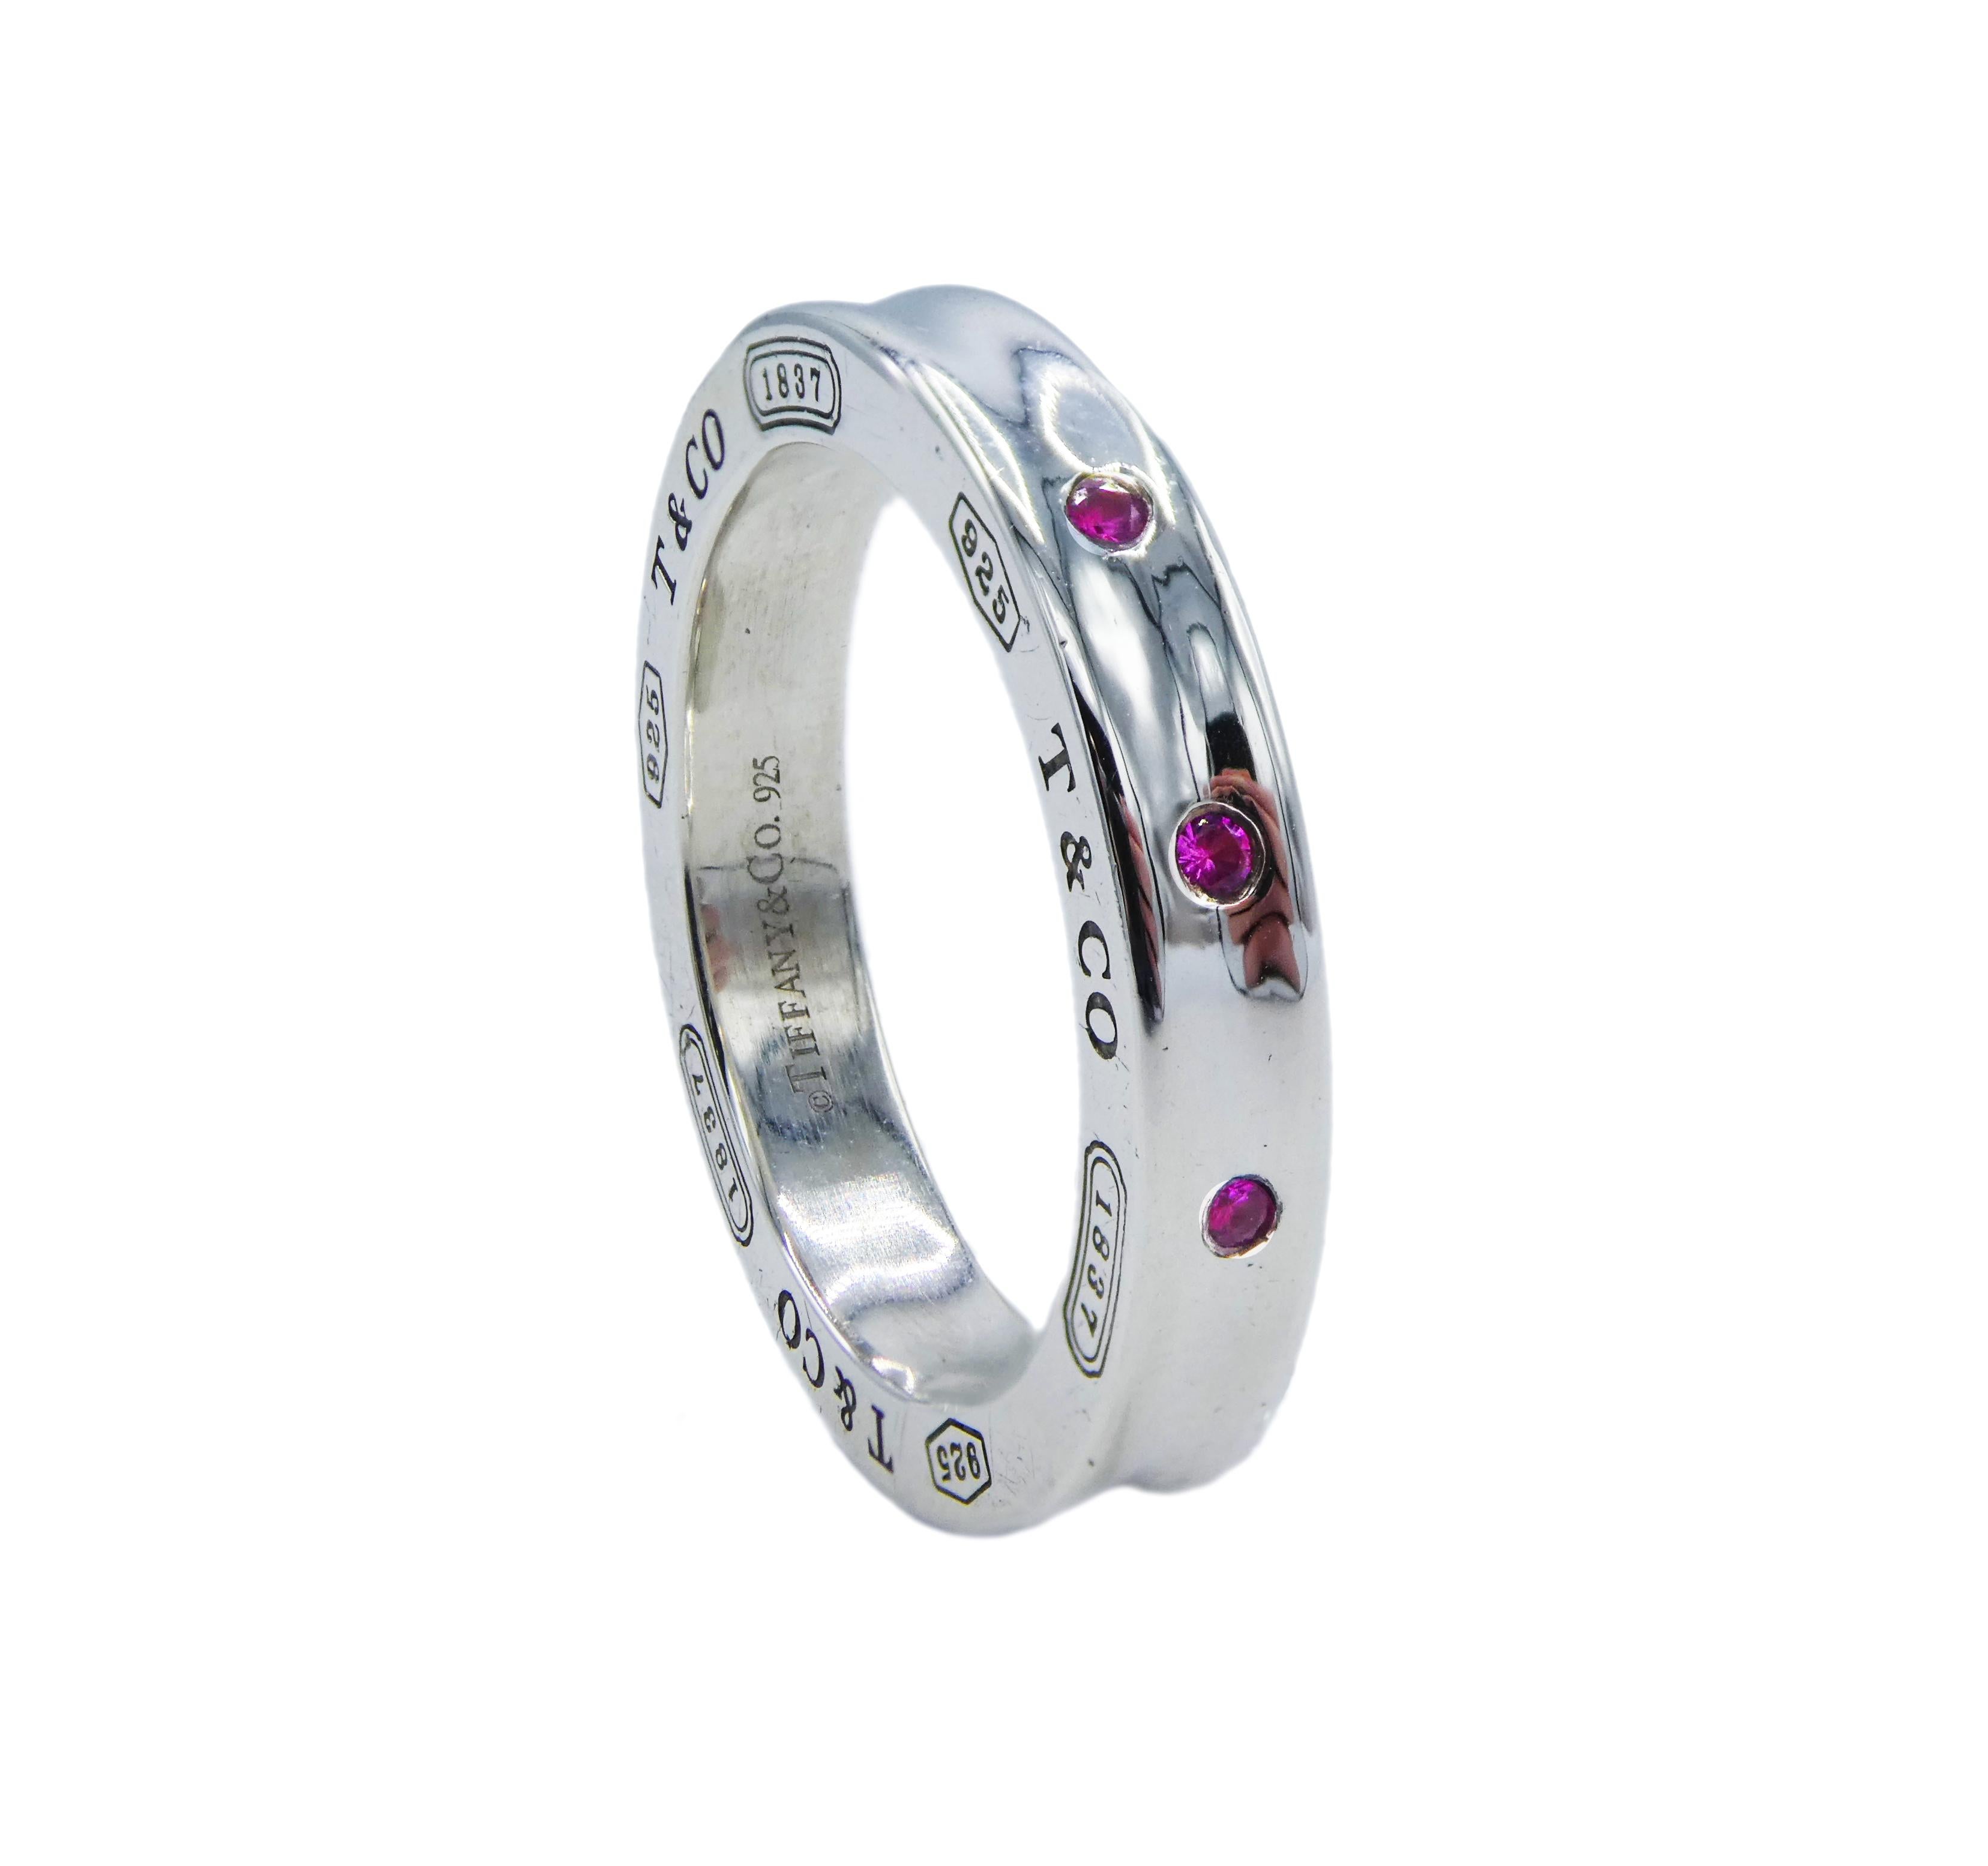 Tiffany & Co. 1837 Pink Sapphire Sterling Silver 925 Band Ring Vintage Size 5.5

Metal: Sterling silver
Weight: 4.82  grams
Stones: 3 Round Cut Pink Sapphires
Finger Size 5.5 (5 1/2) US
Signed: 